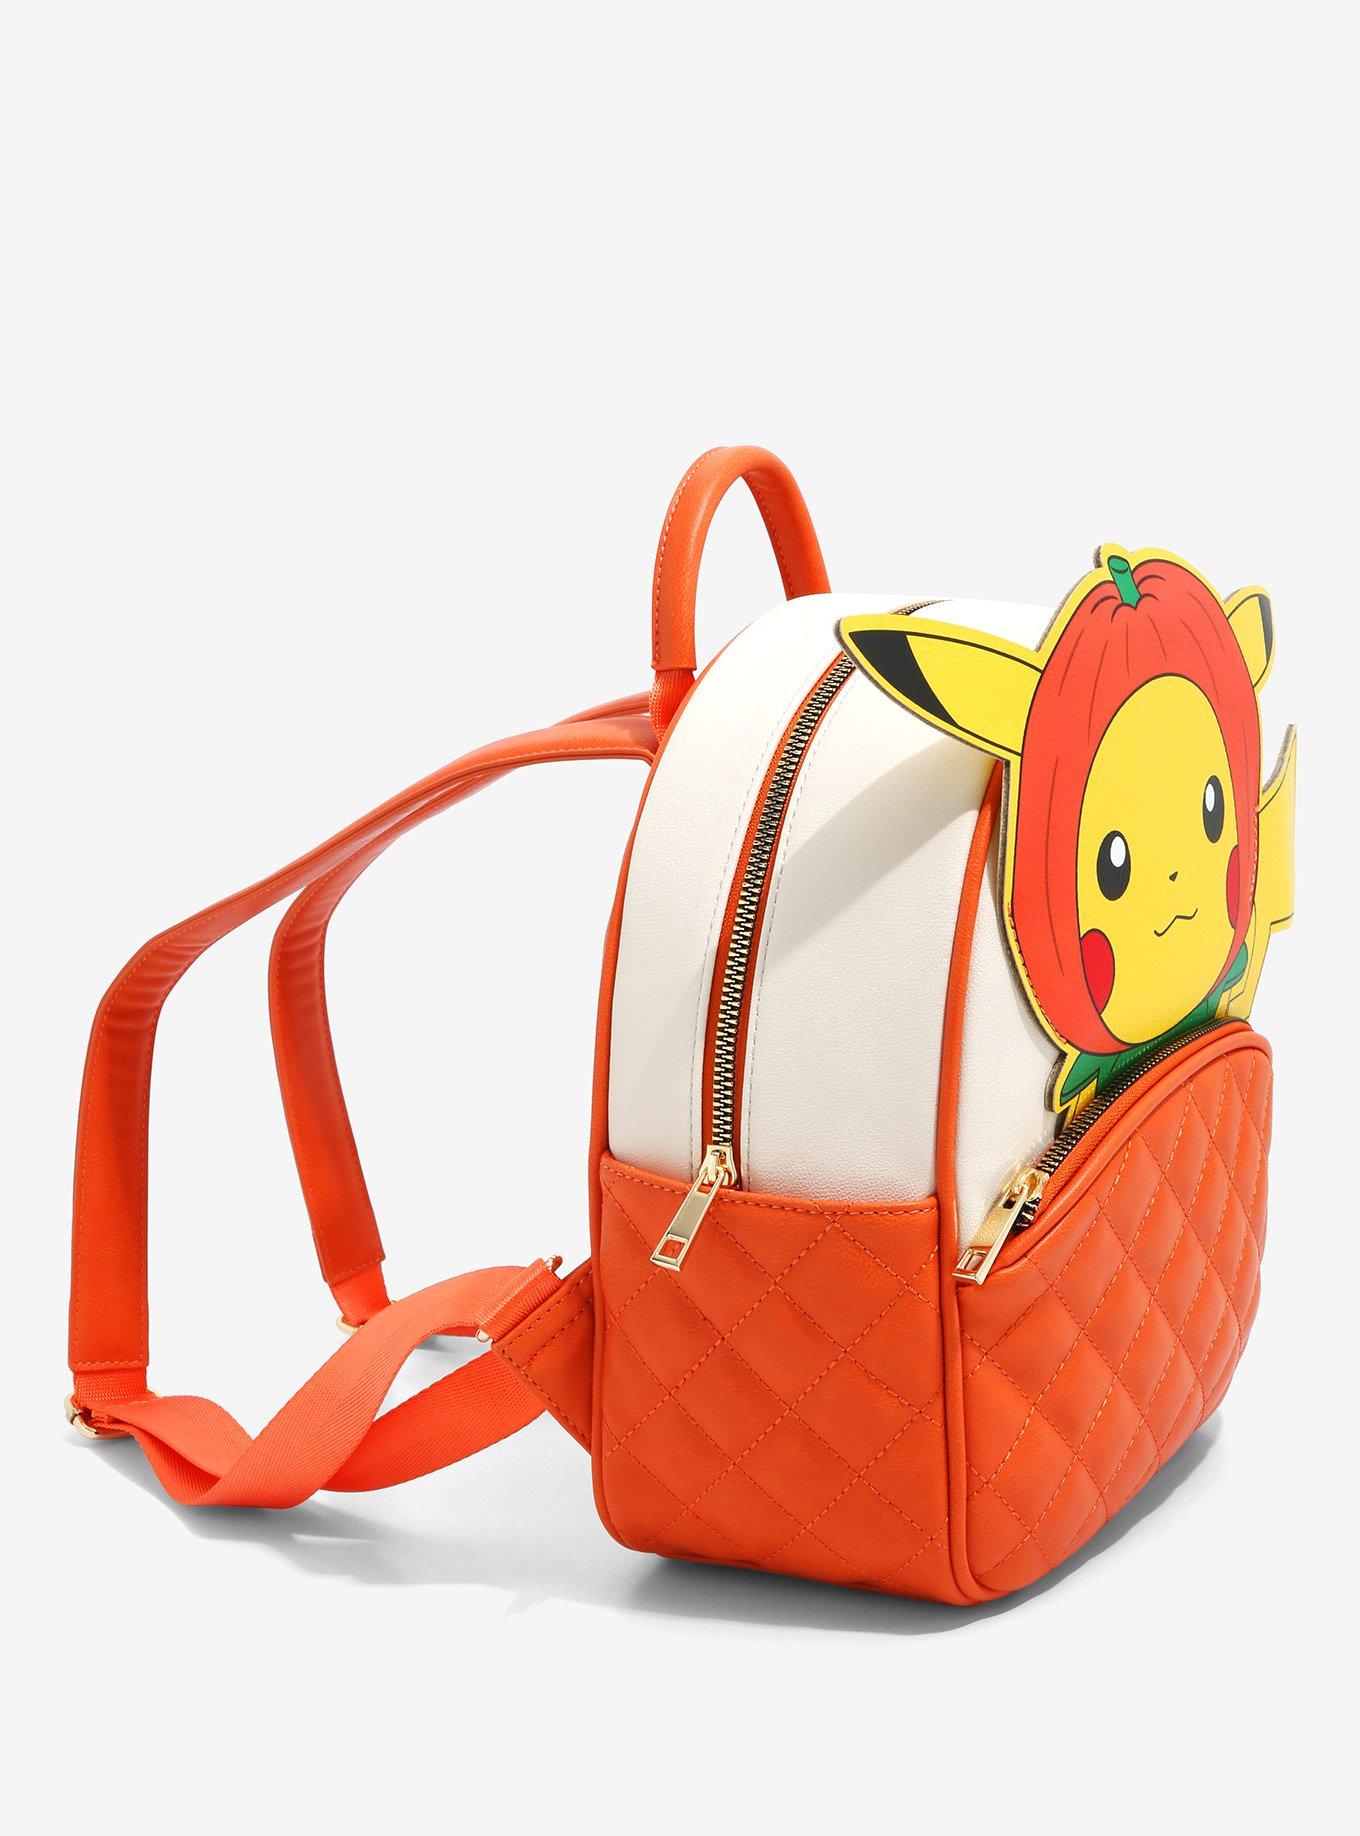 Loungefly Pokémon Sleeping Floral Crossbody Bag - BoxLunch Exclusive